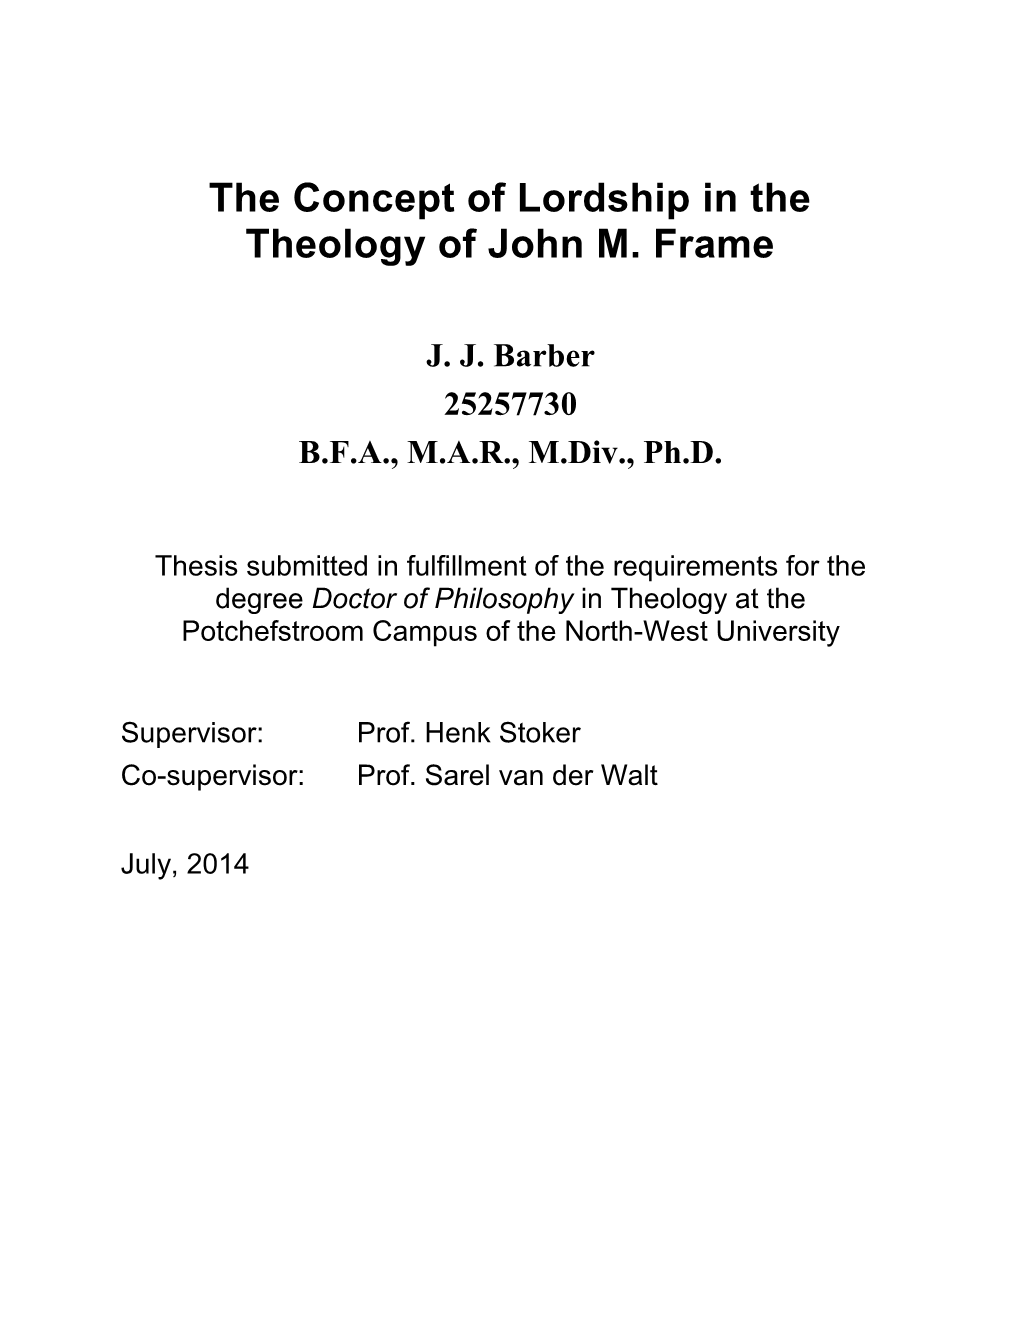 The Concept of Lordship in the Theology of John M. Frame